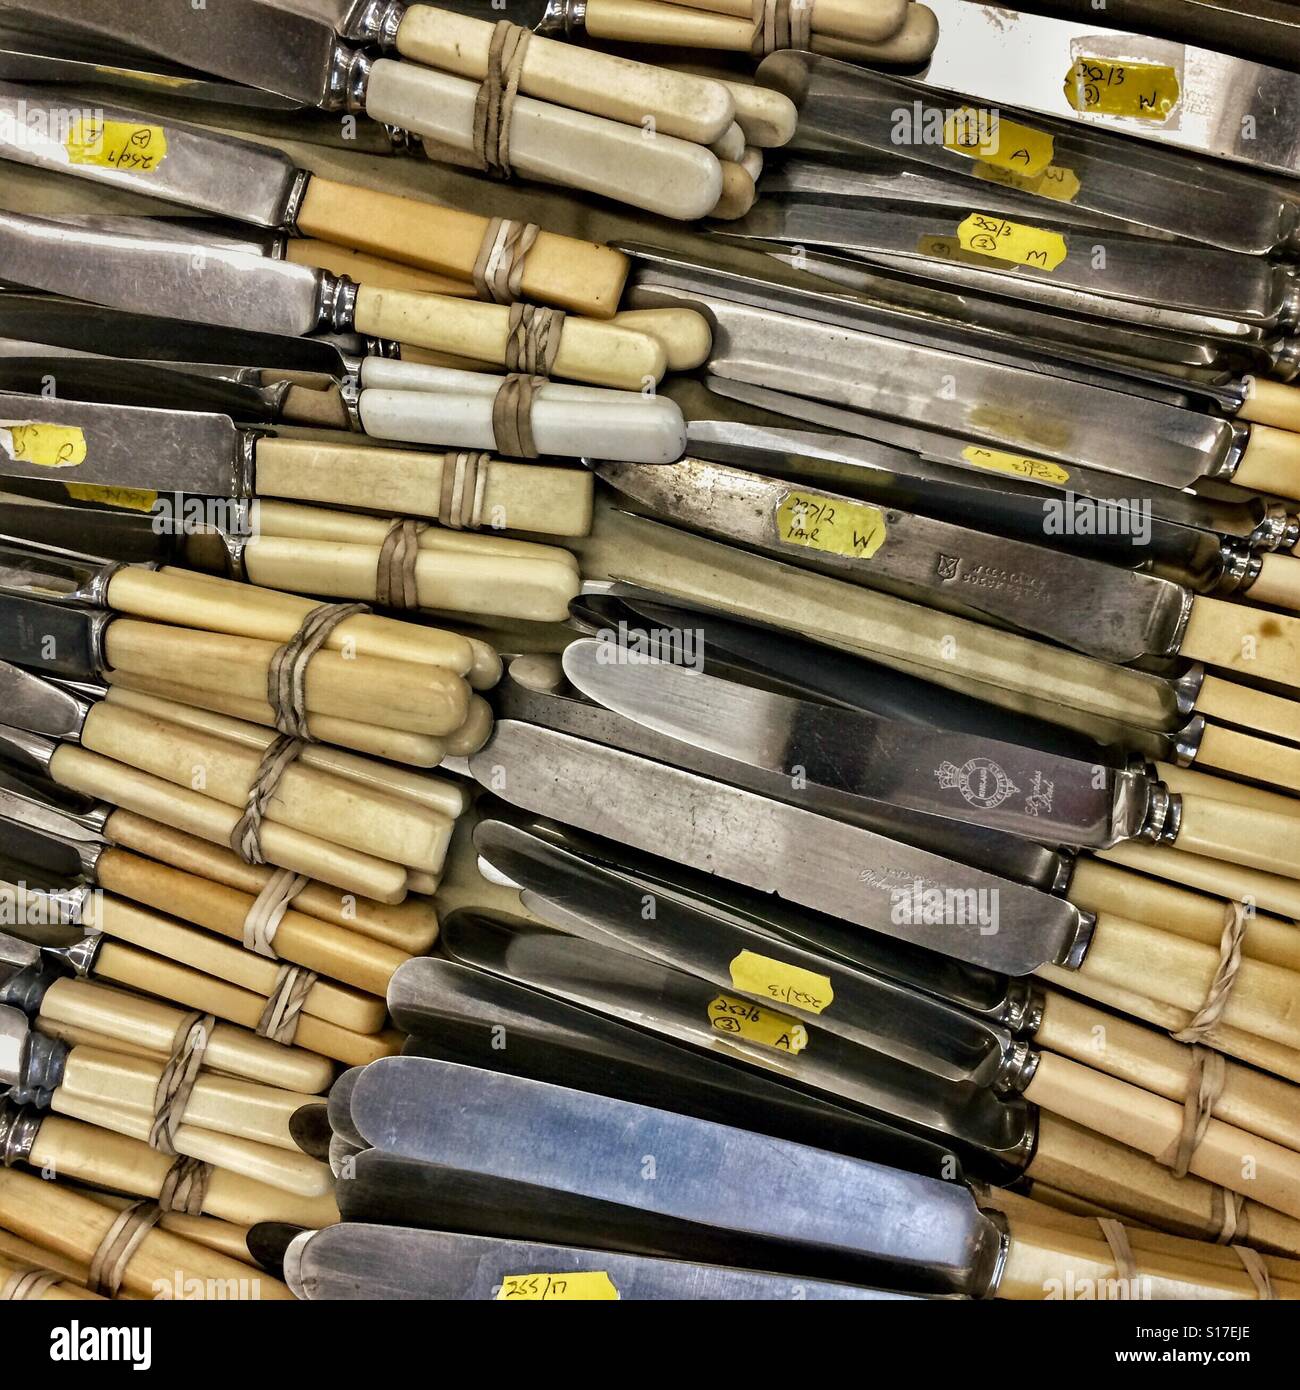 Old vintage cutlery knives Stock Photo